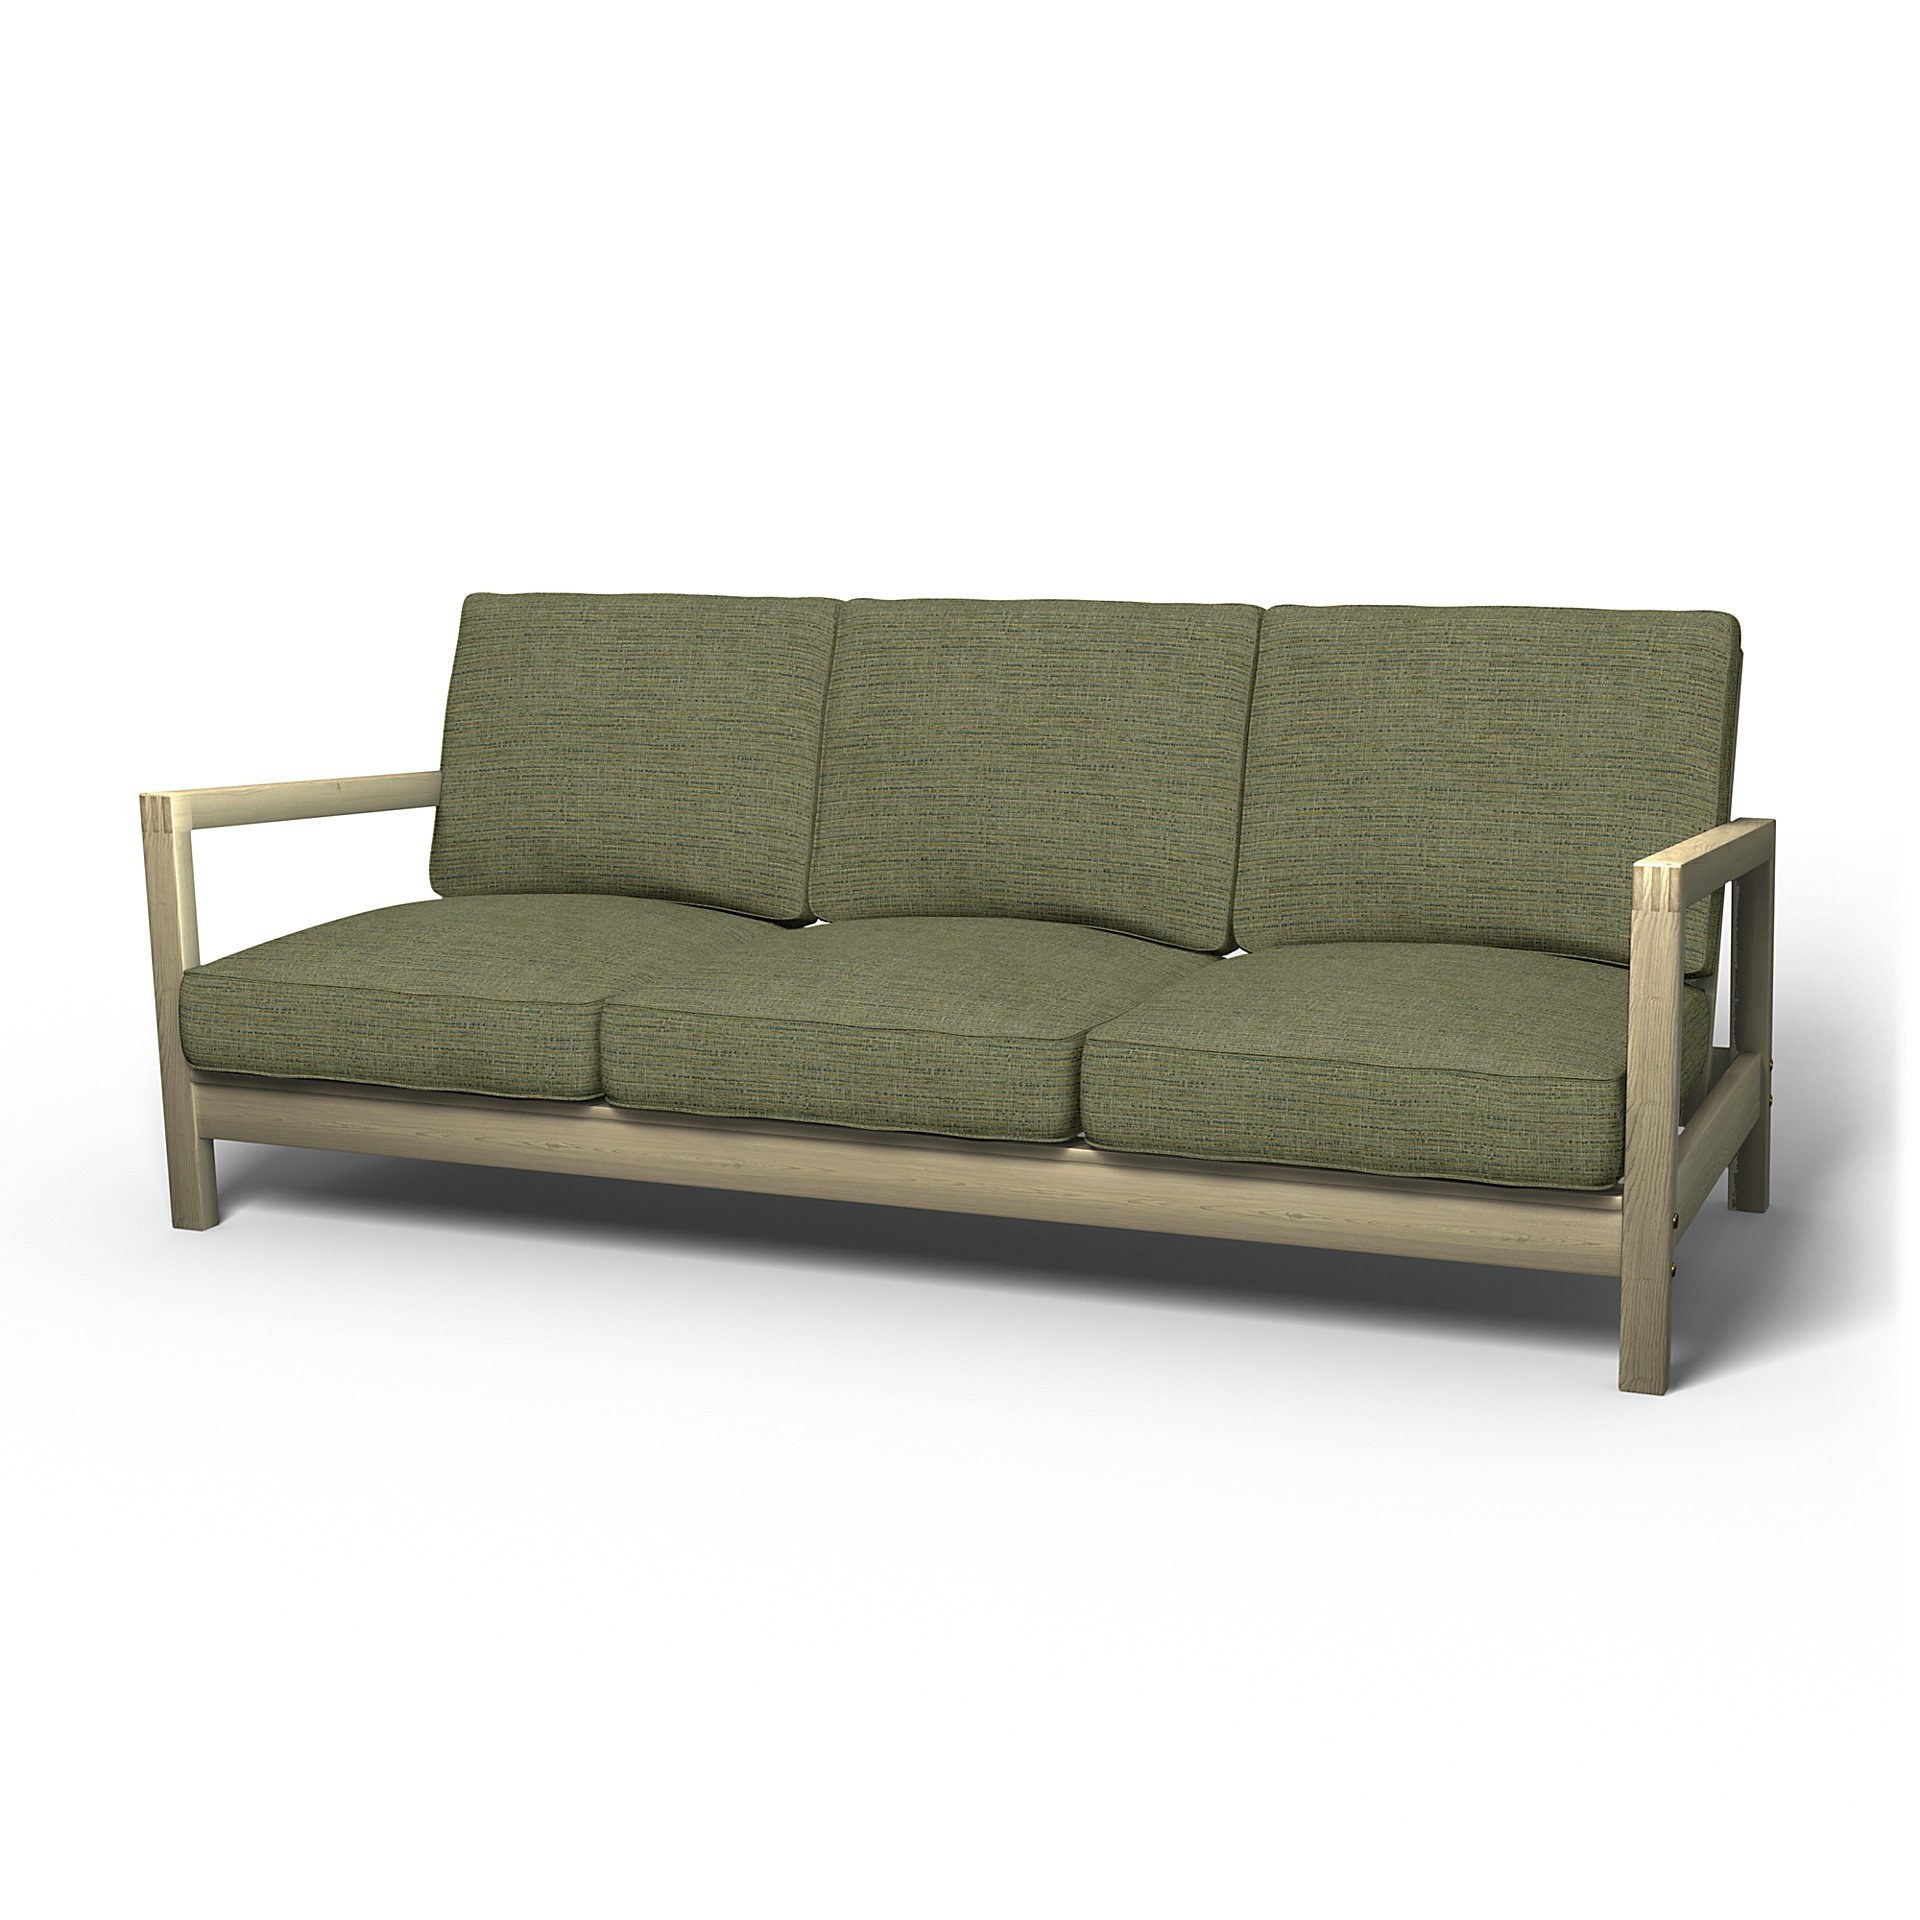 IKEA - Lillberg 3 Seater Sofa Cover, Meadow Green, Boucle & Texture - Bemz